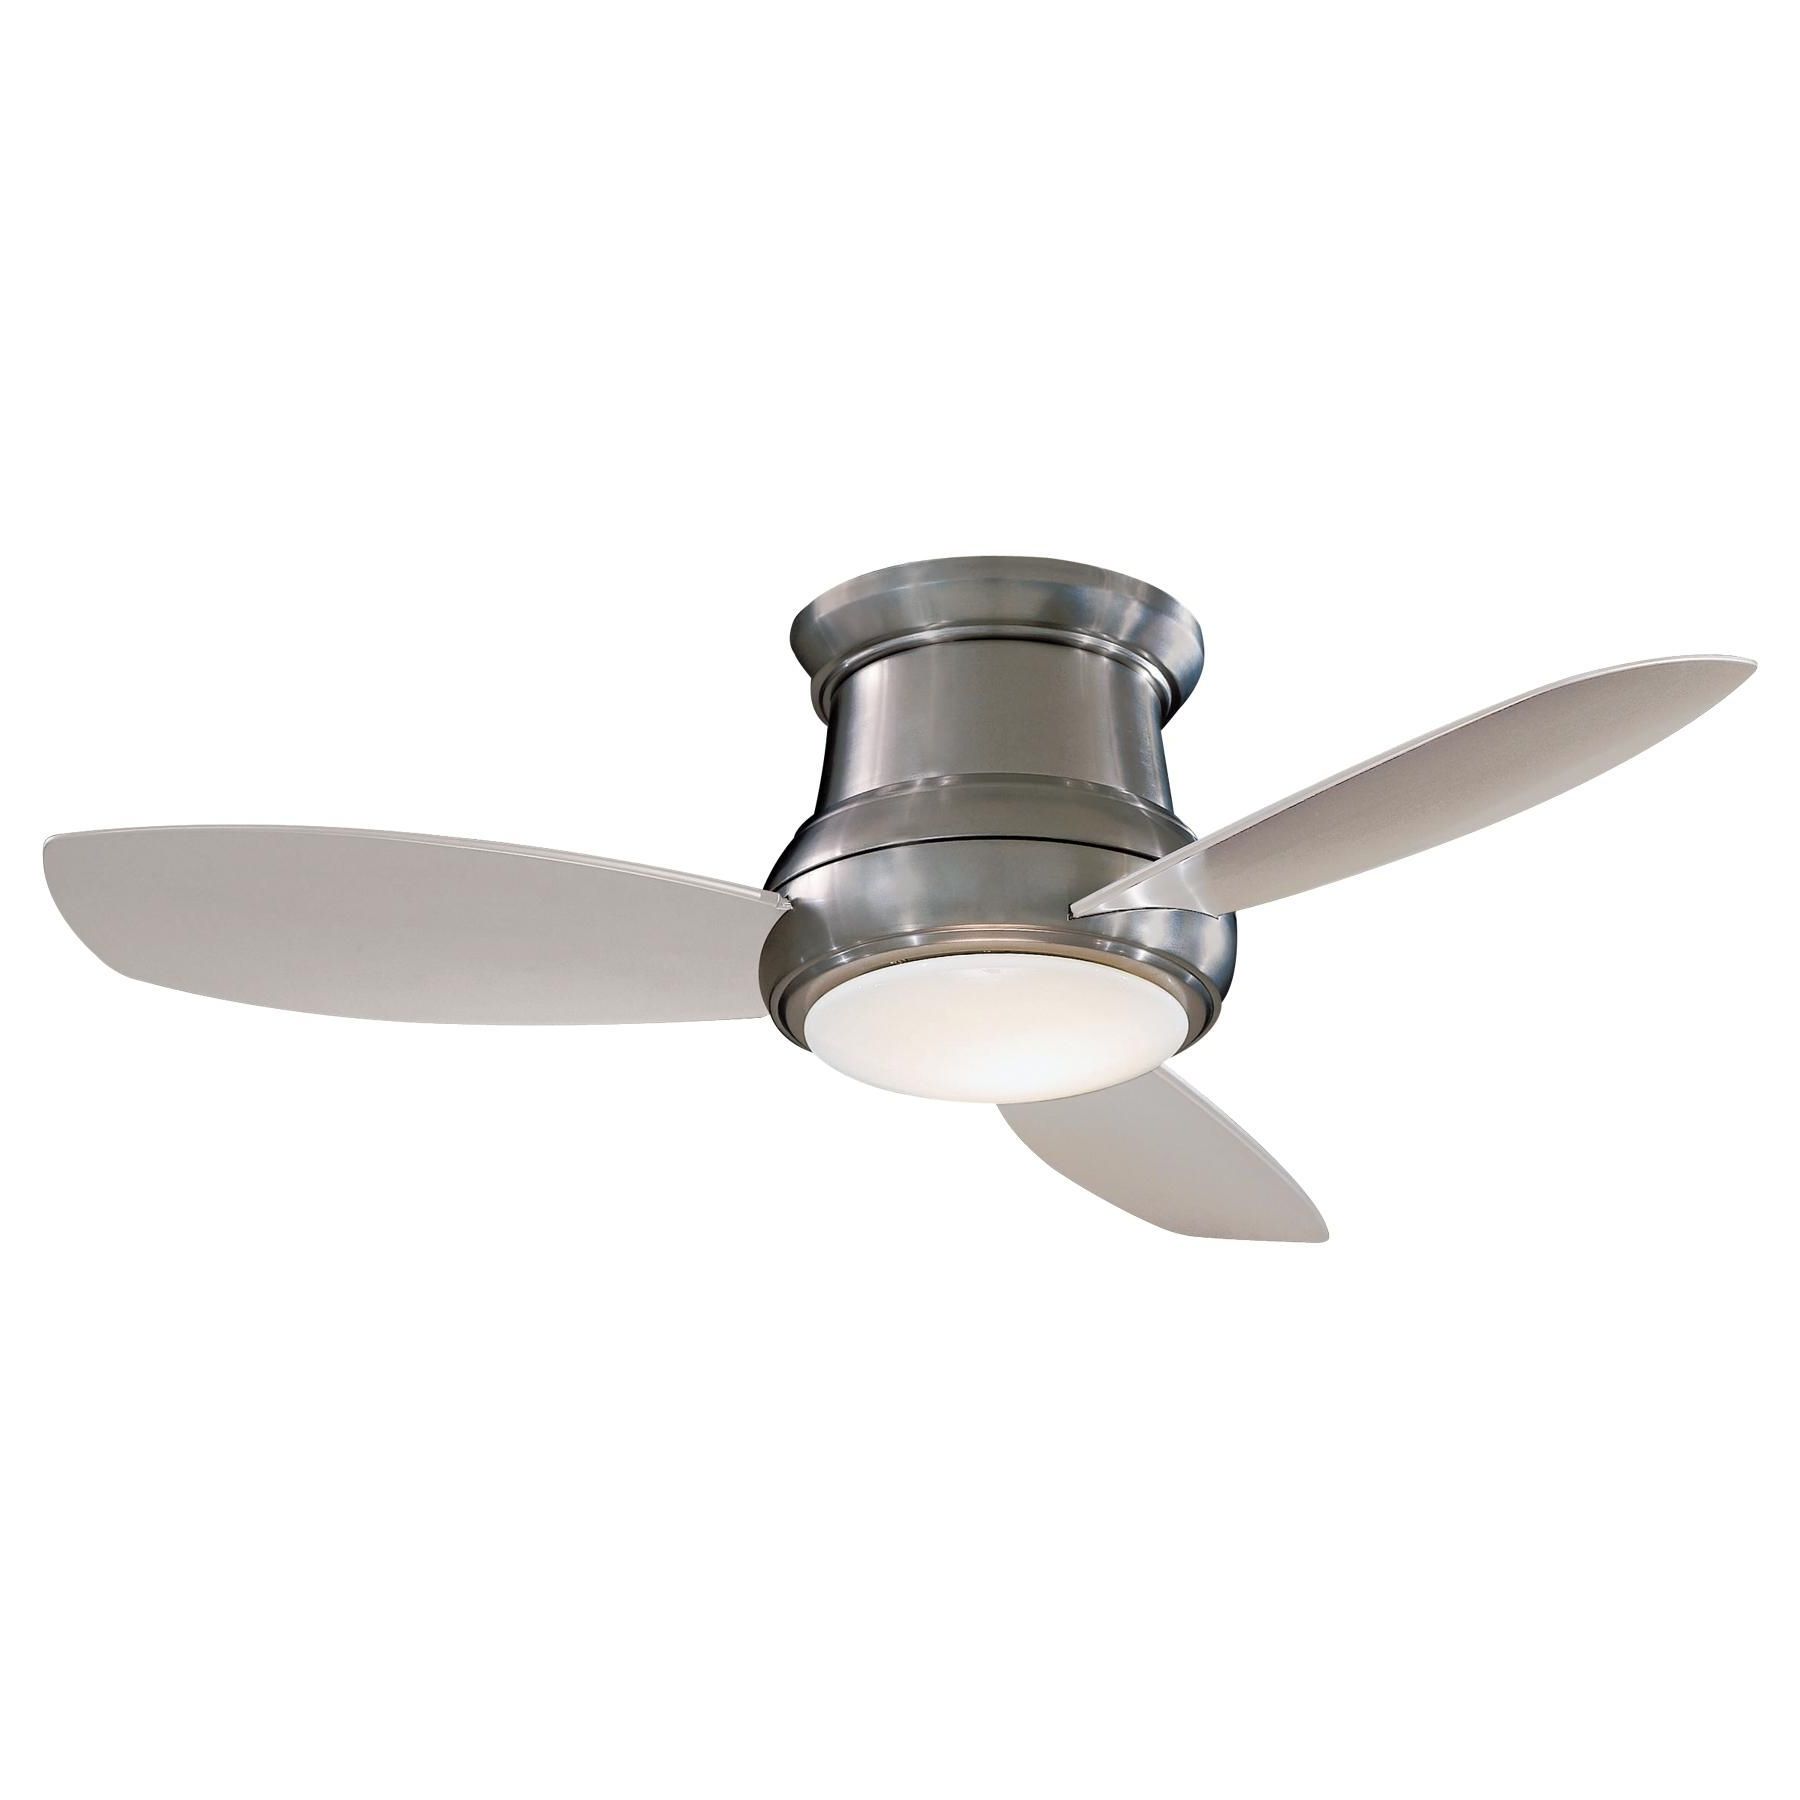 Morton 3 Blade Ceiling Fans Throughout Preferred Minka Aire "concept Ii" Ceiling Fan, 44" Dia S (View 17 of 20)